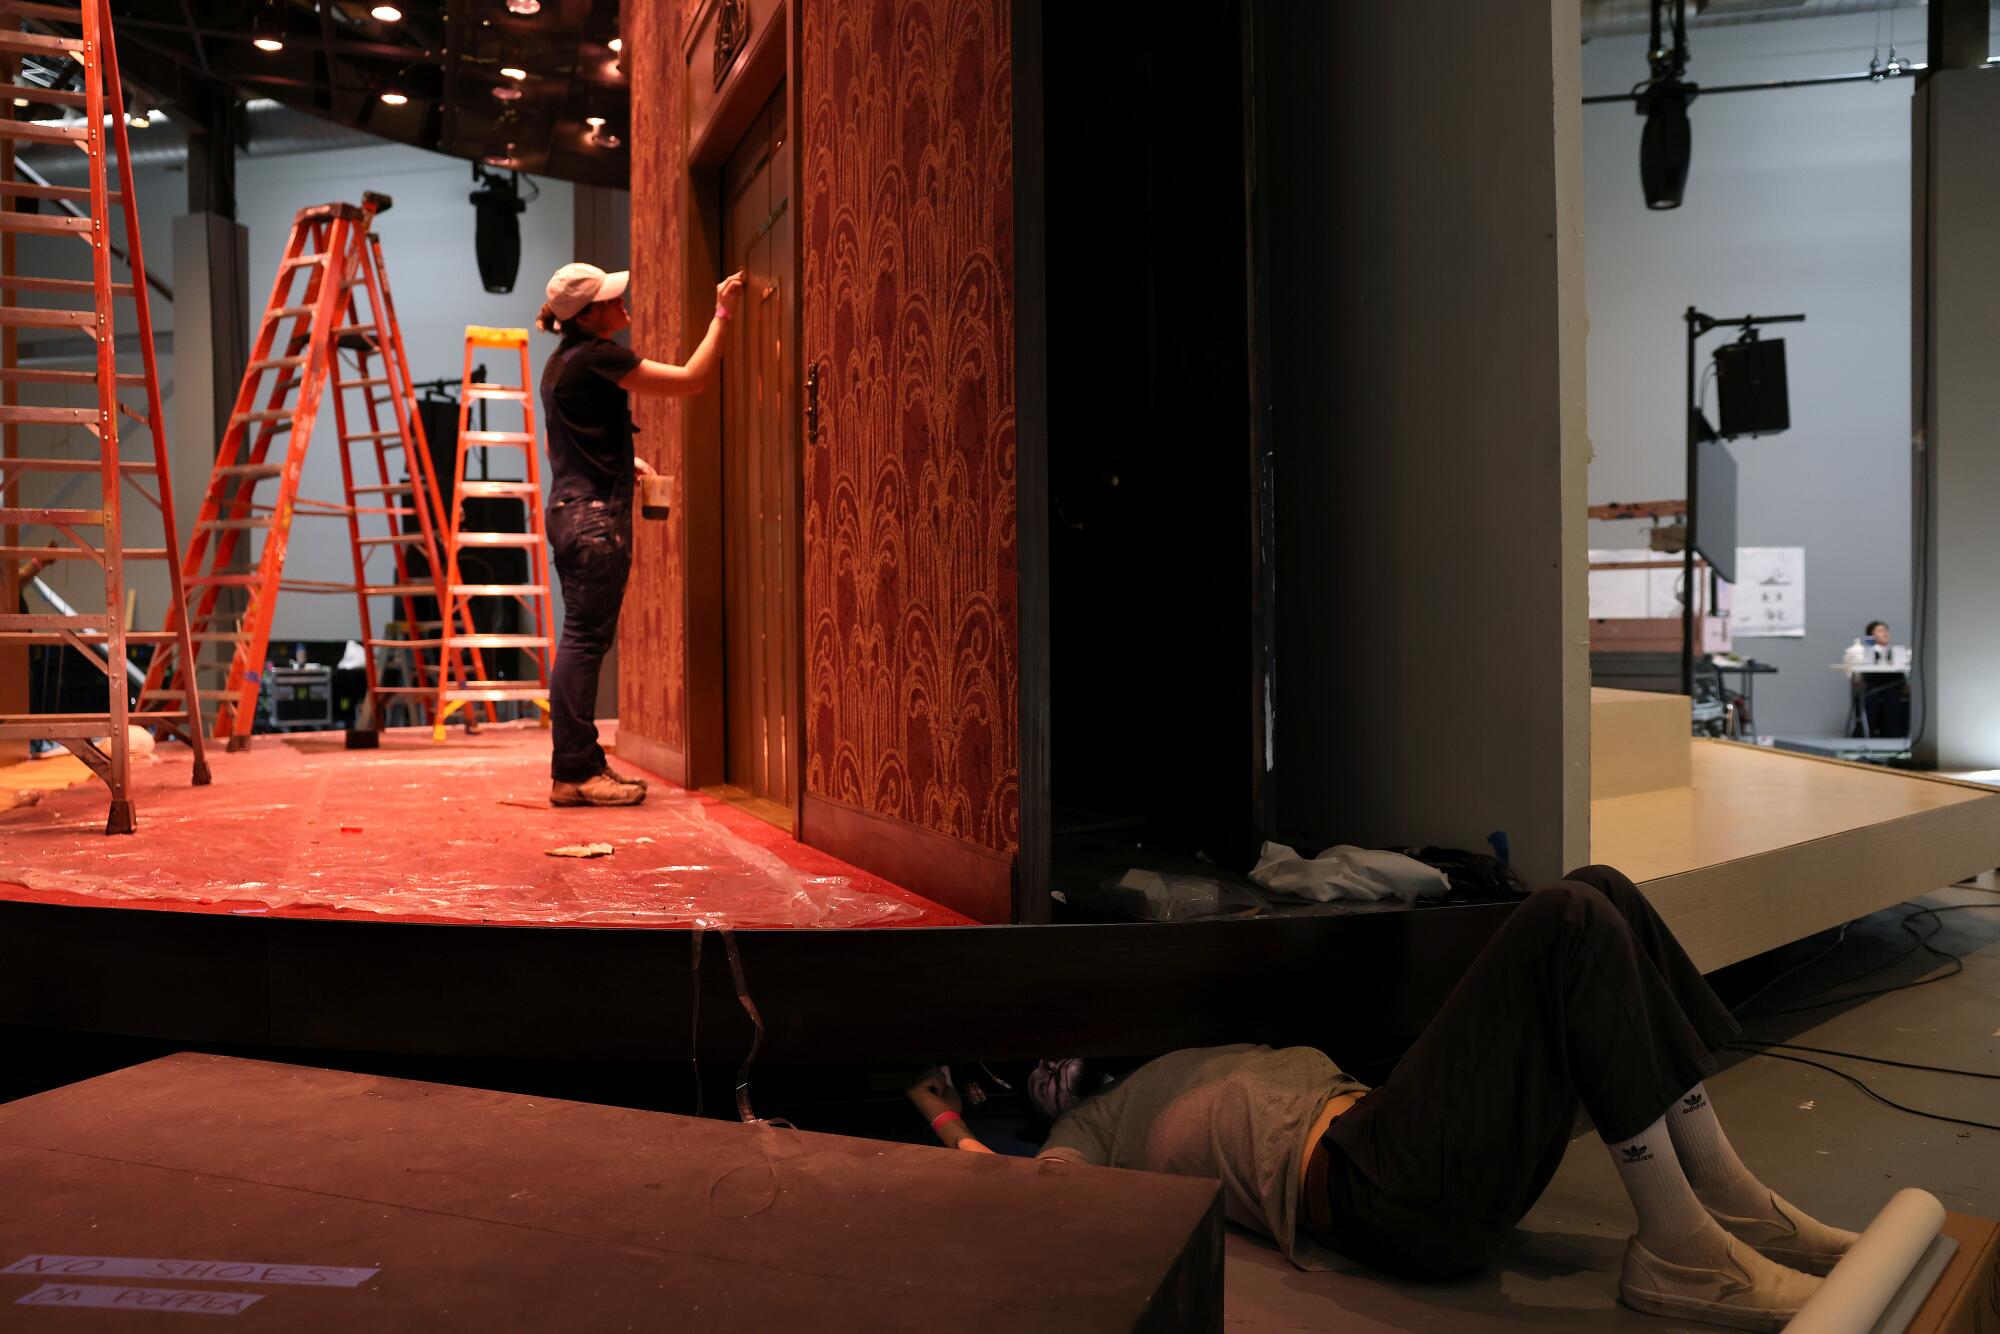 A woman in a cap paints a stage door while another works under the stage. 